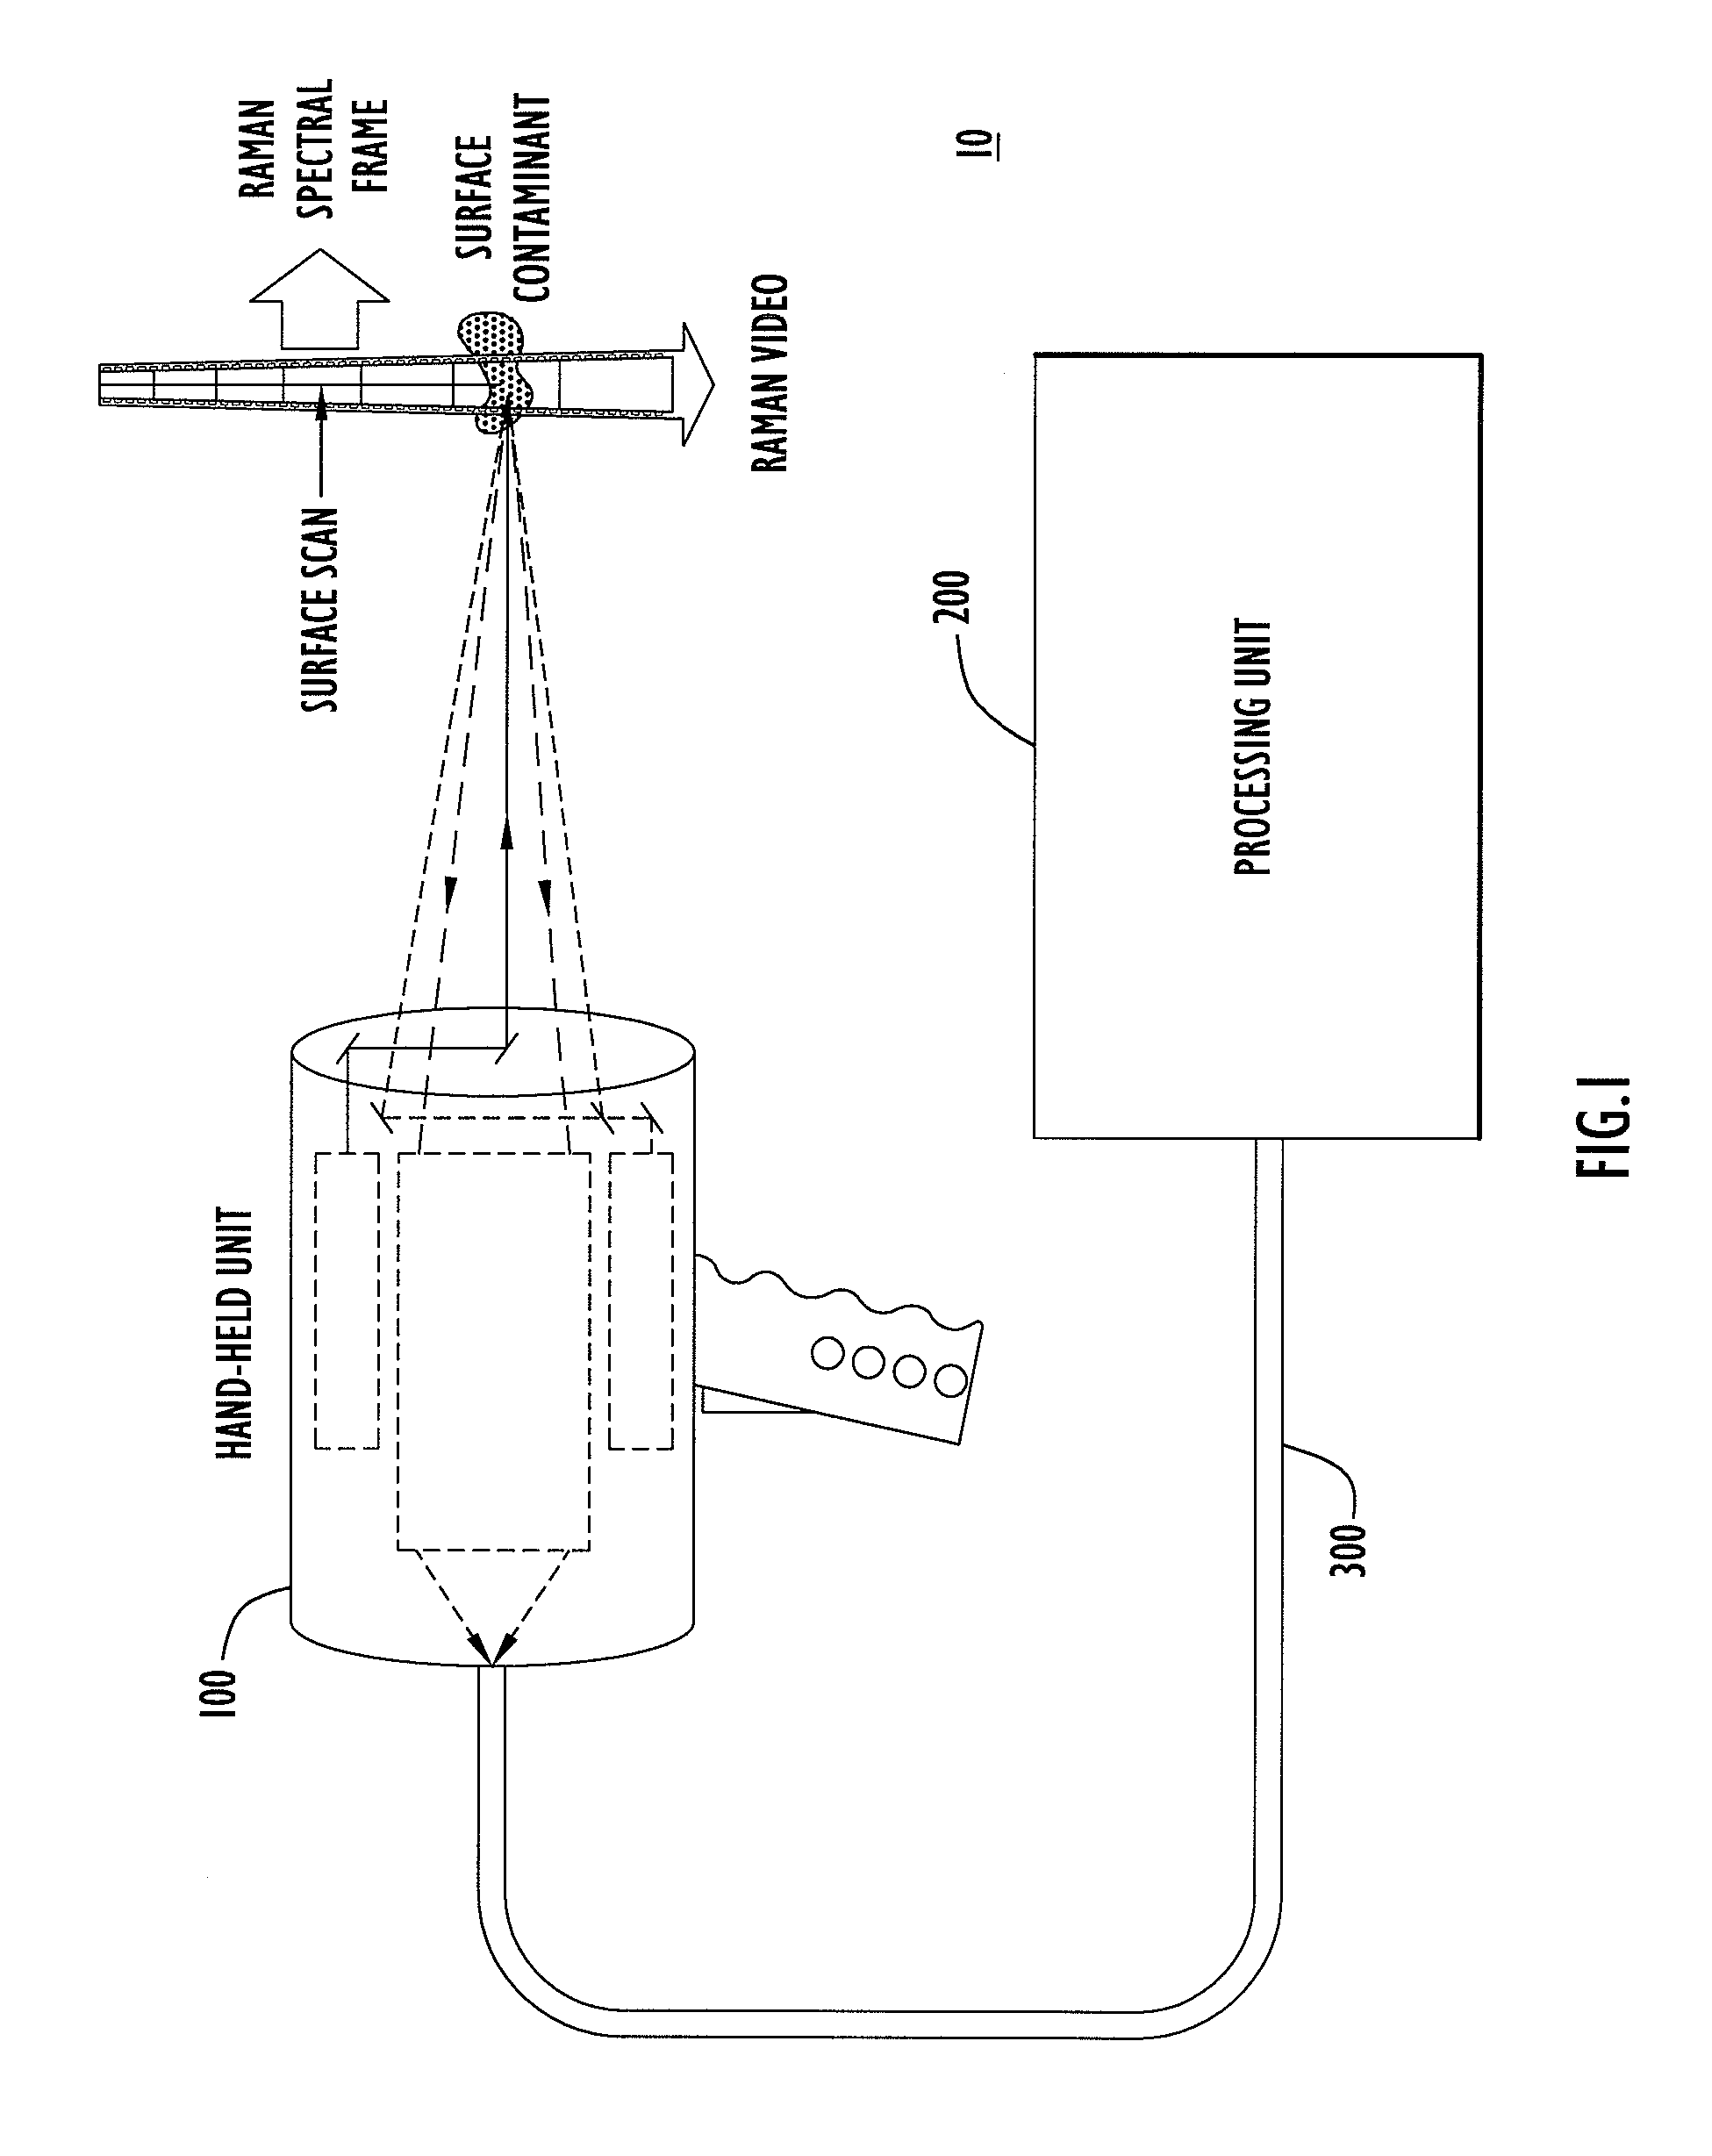 Method, apparatus and system for rapid and sensitive standoff detection of surface contaminants